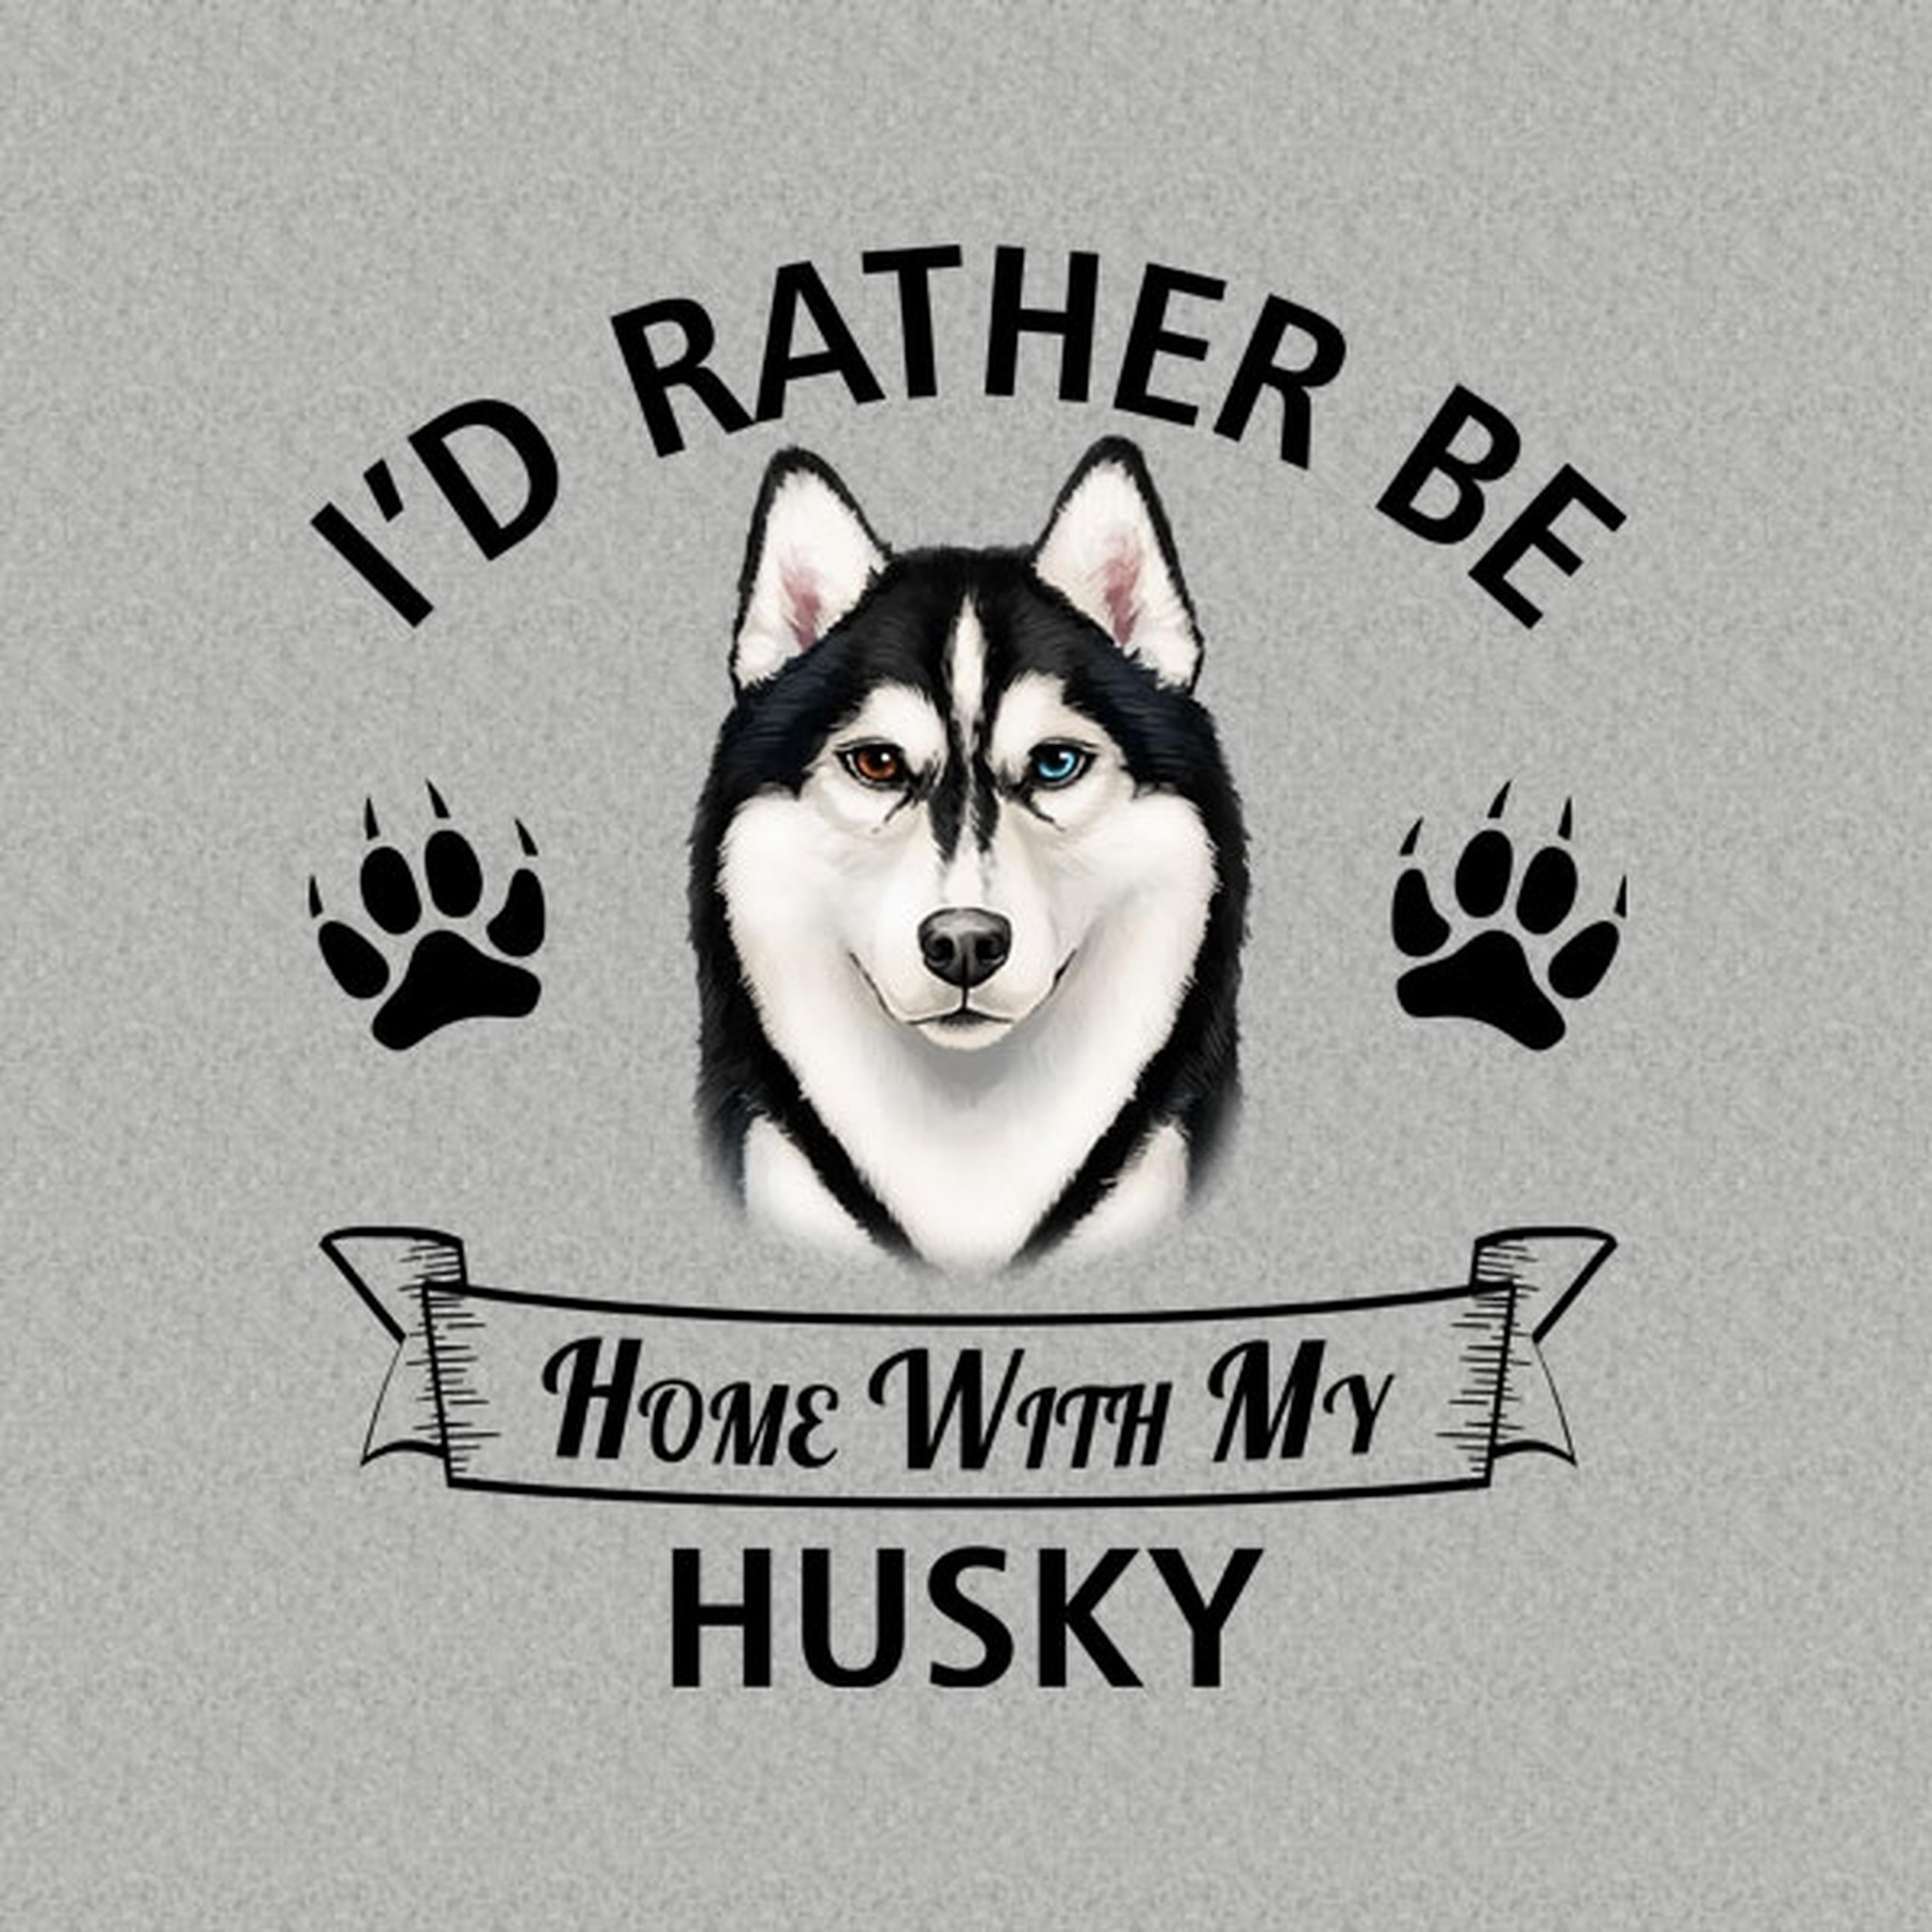 I'd rather stay home with my Husky - T-shirt